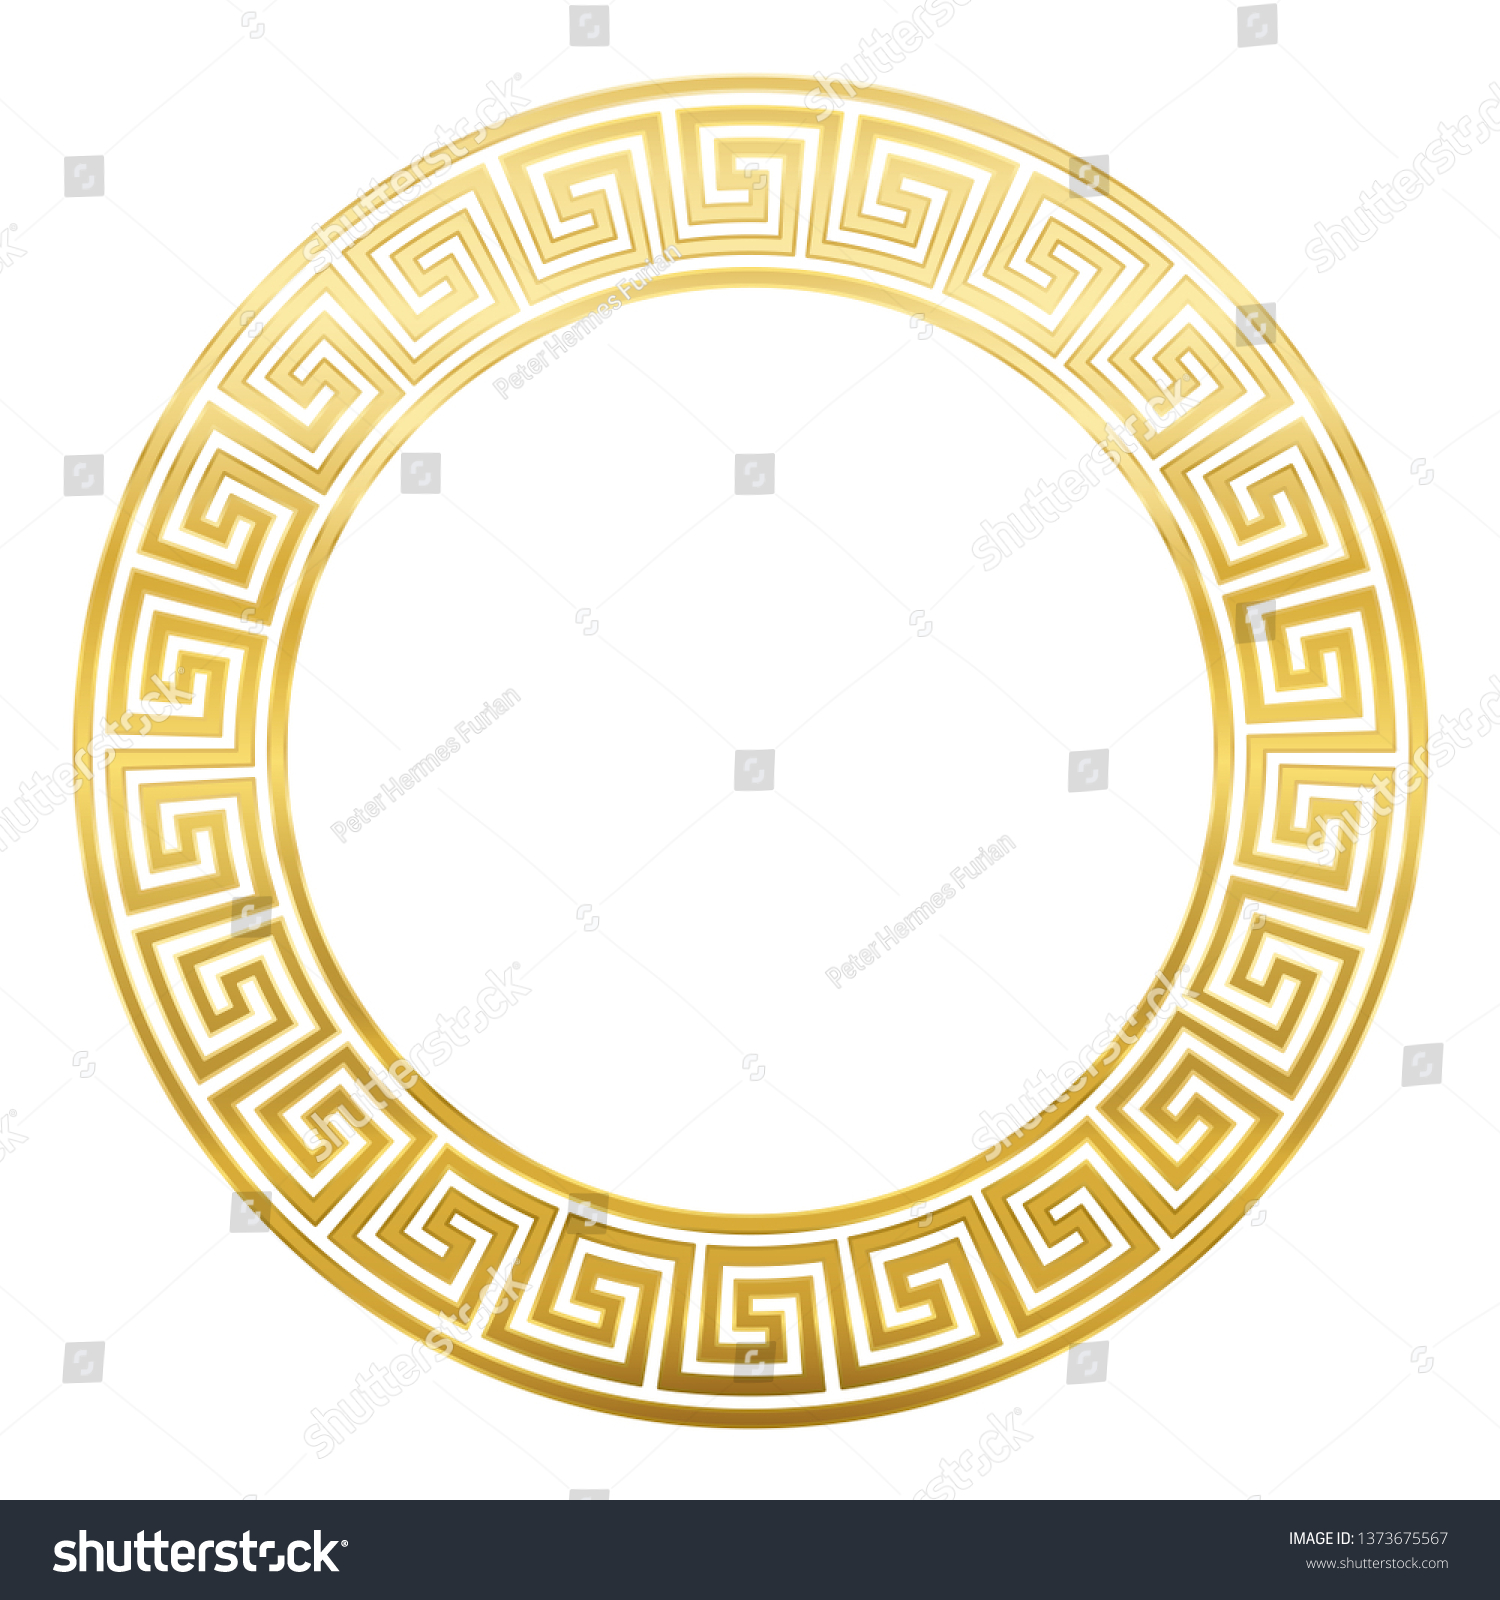 Meander Design Circle Frame Seamless Pattern Stock Vector (Royalty Free ...